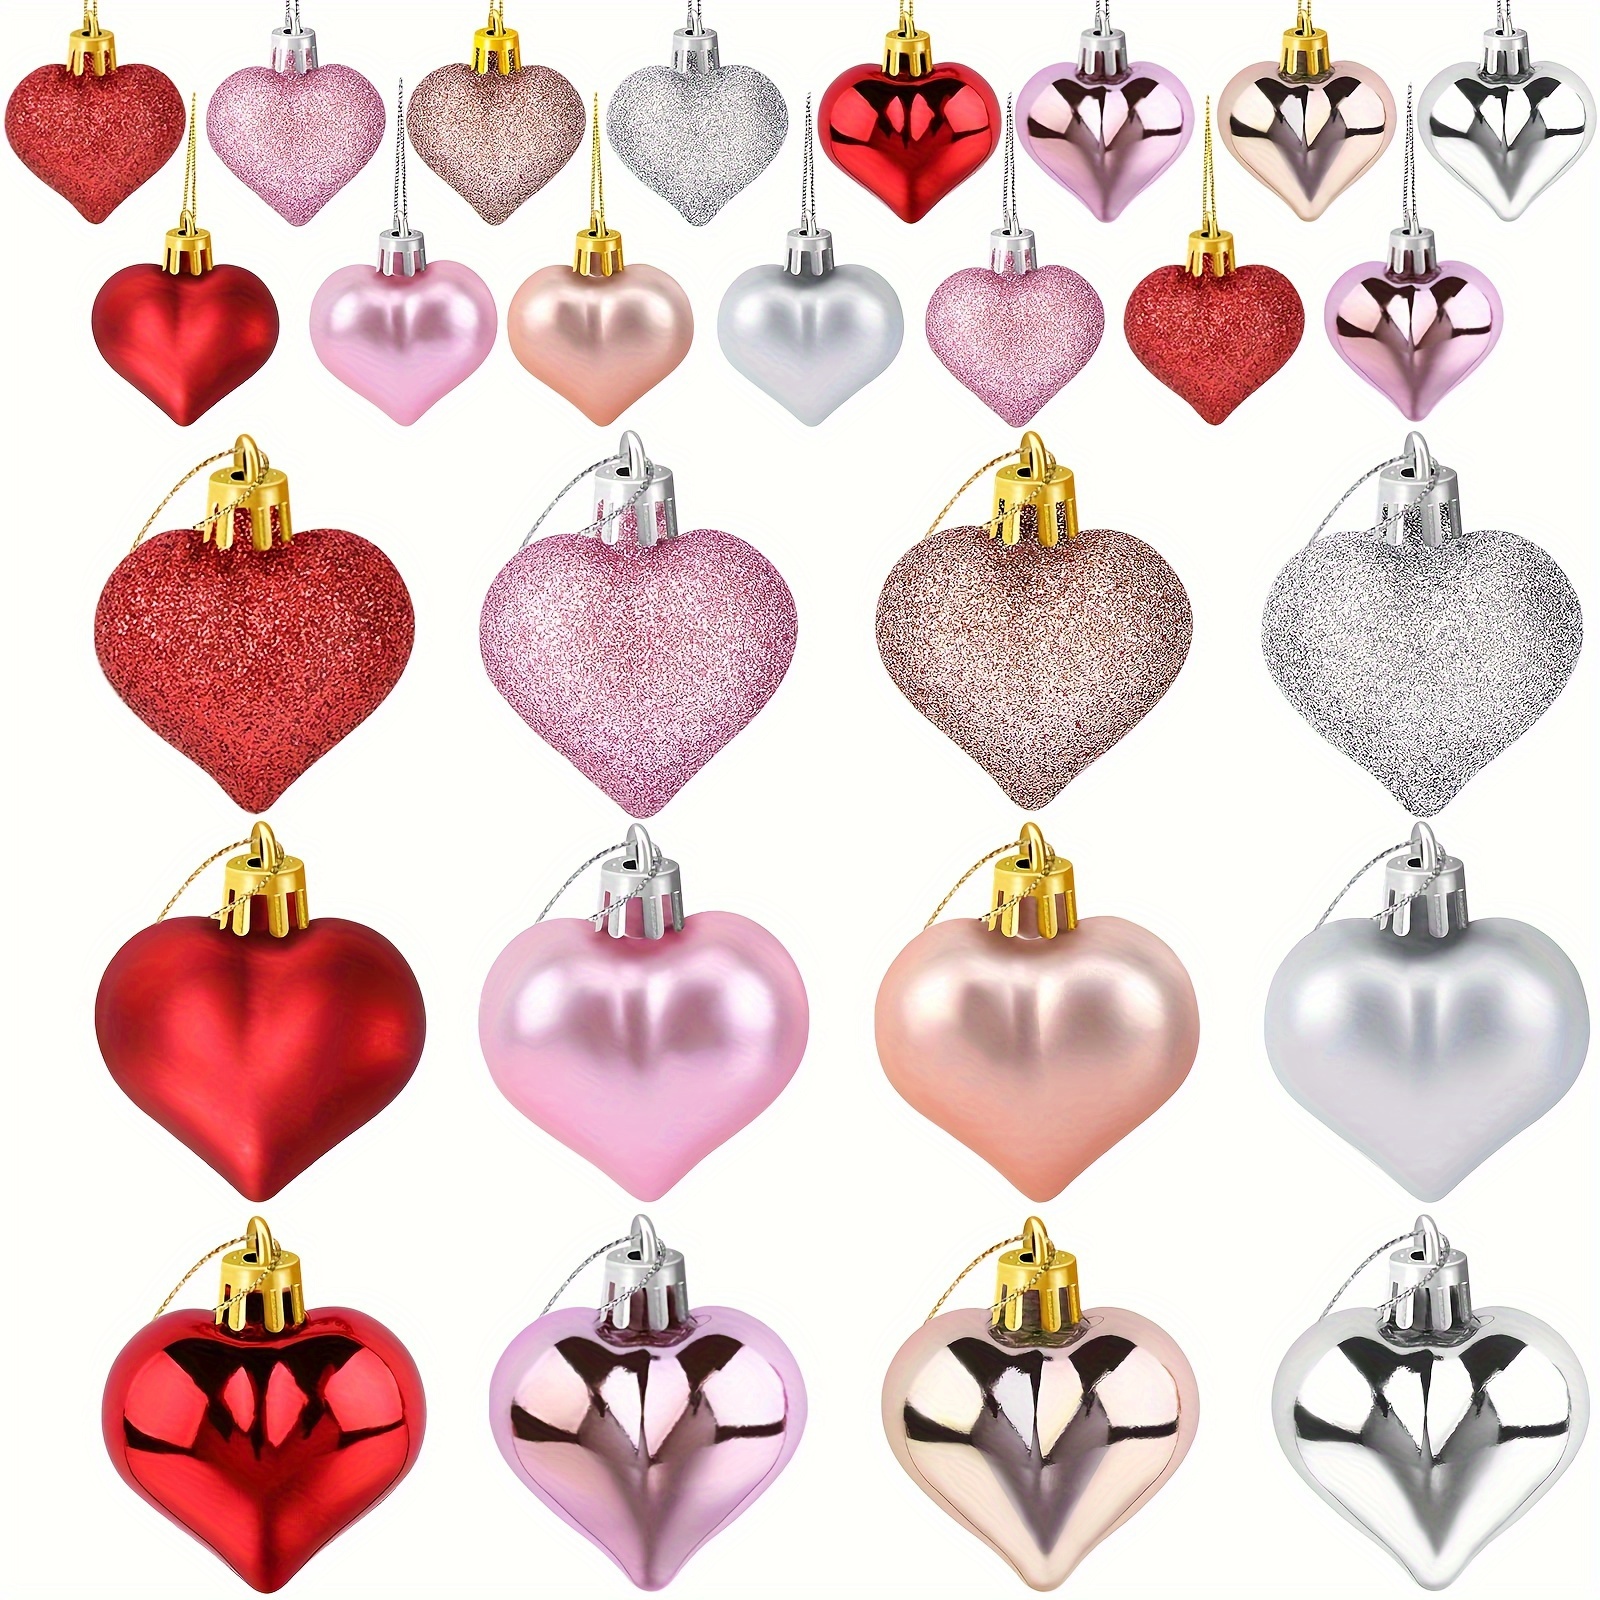 24 Pcs Valentine'S Day Heart Shaped Ornaments, Valentines Heart Decorations,  Romantic Valentine'S Day Hanging Decorations, Red Pink Silver Heart Shaped  Baubles For Home Wedding Party Valentines Day